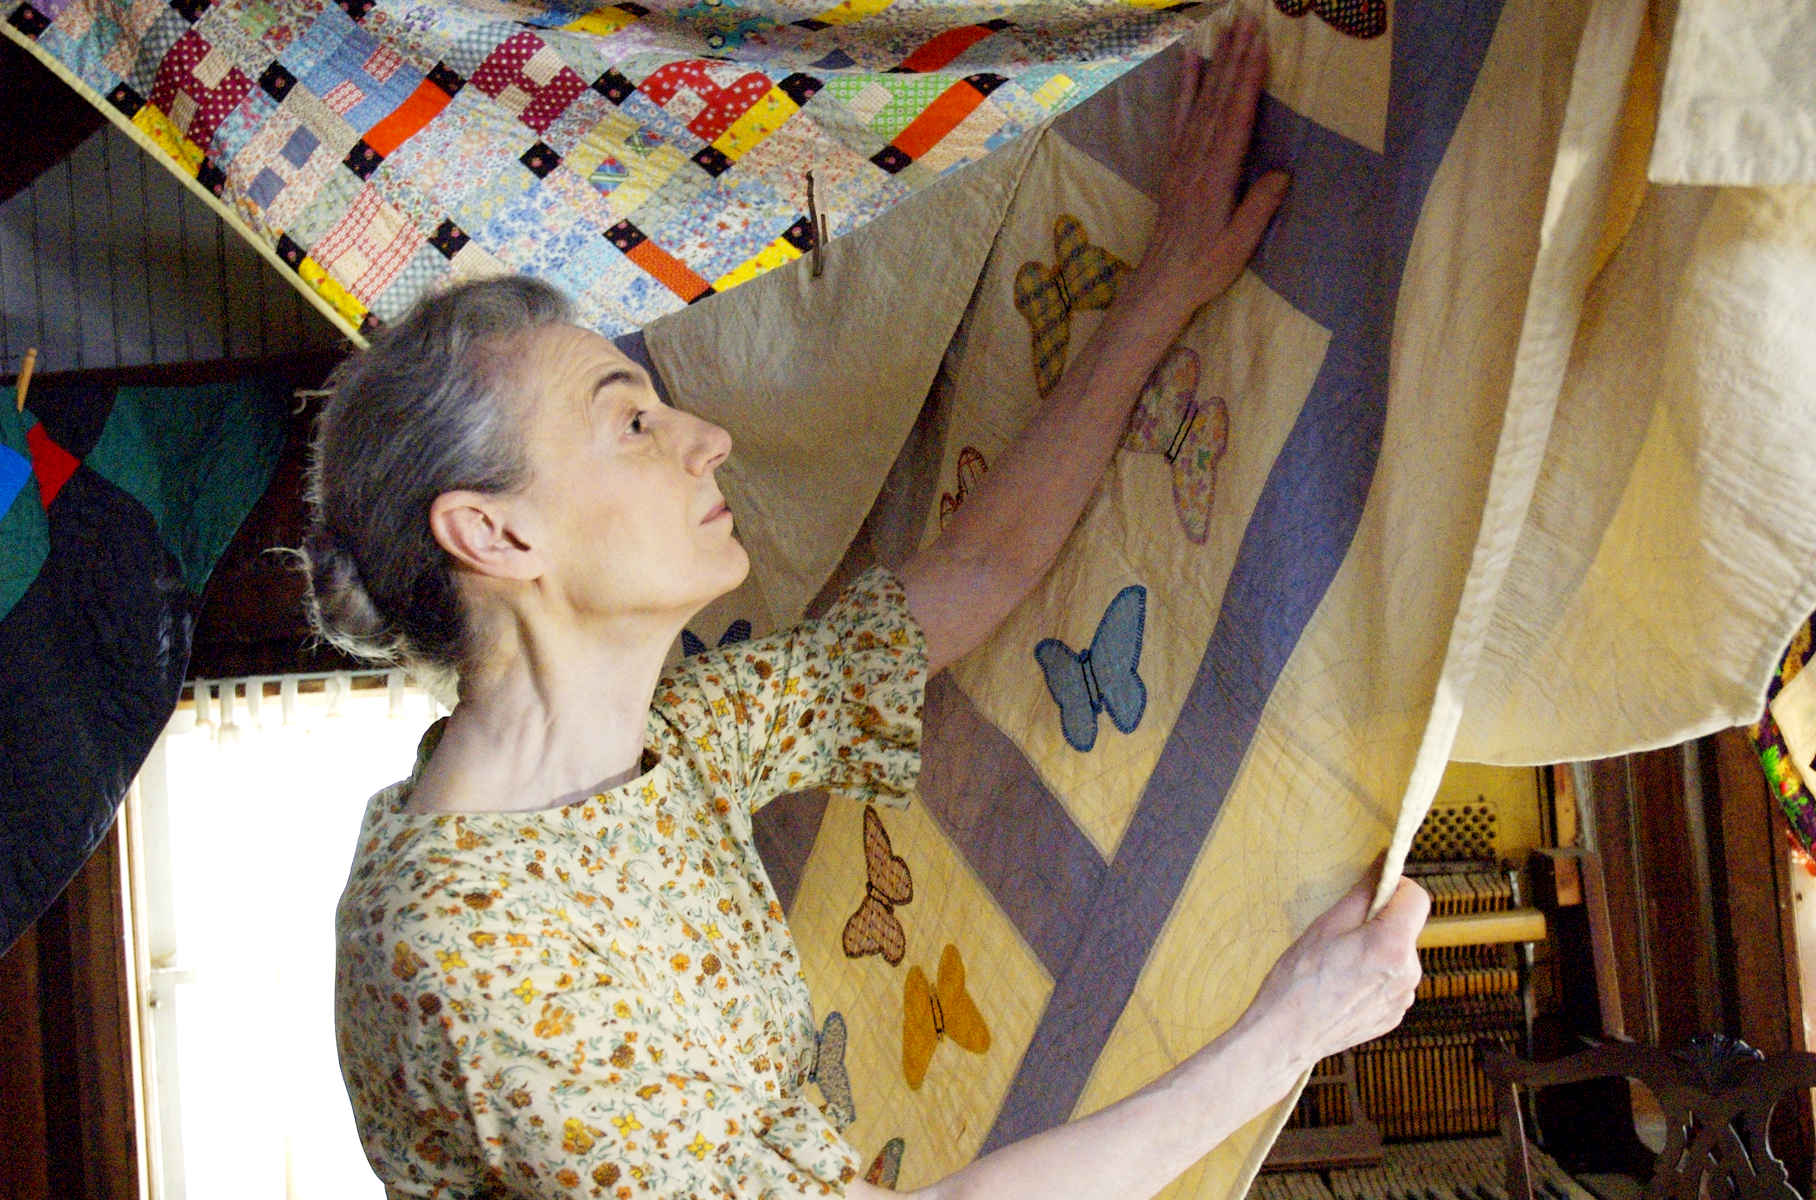 Marian Seldes stars as Peggy in Monterey Media's Home (2009)